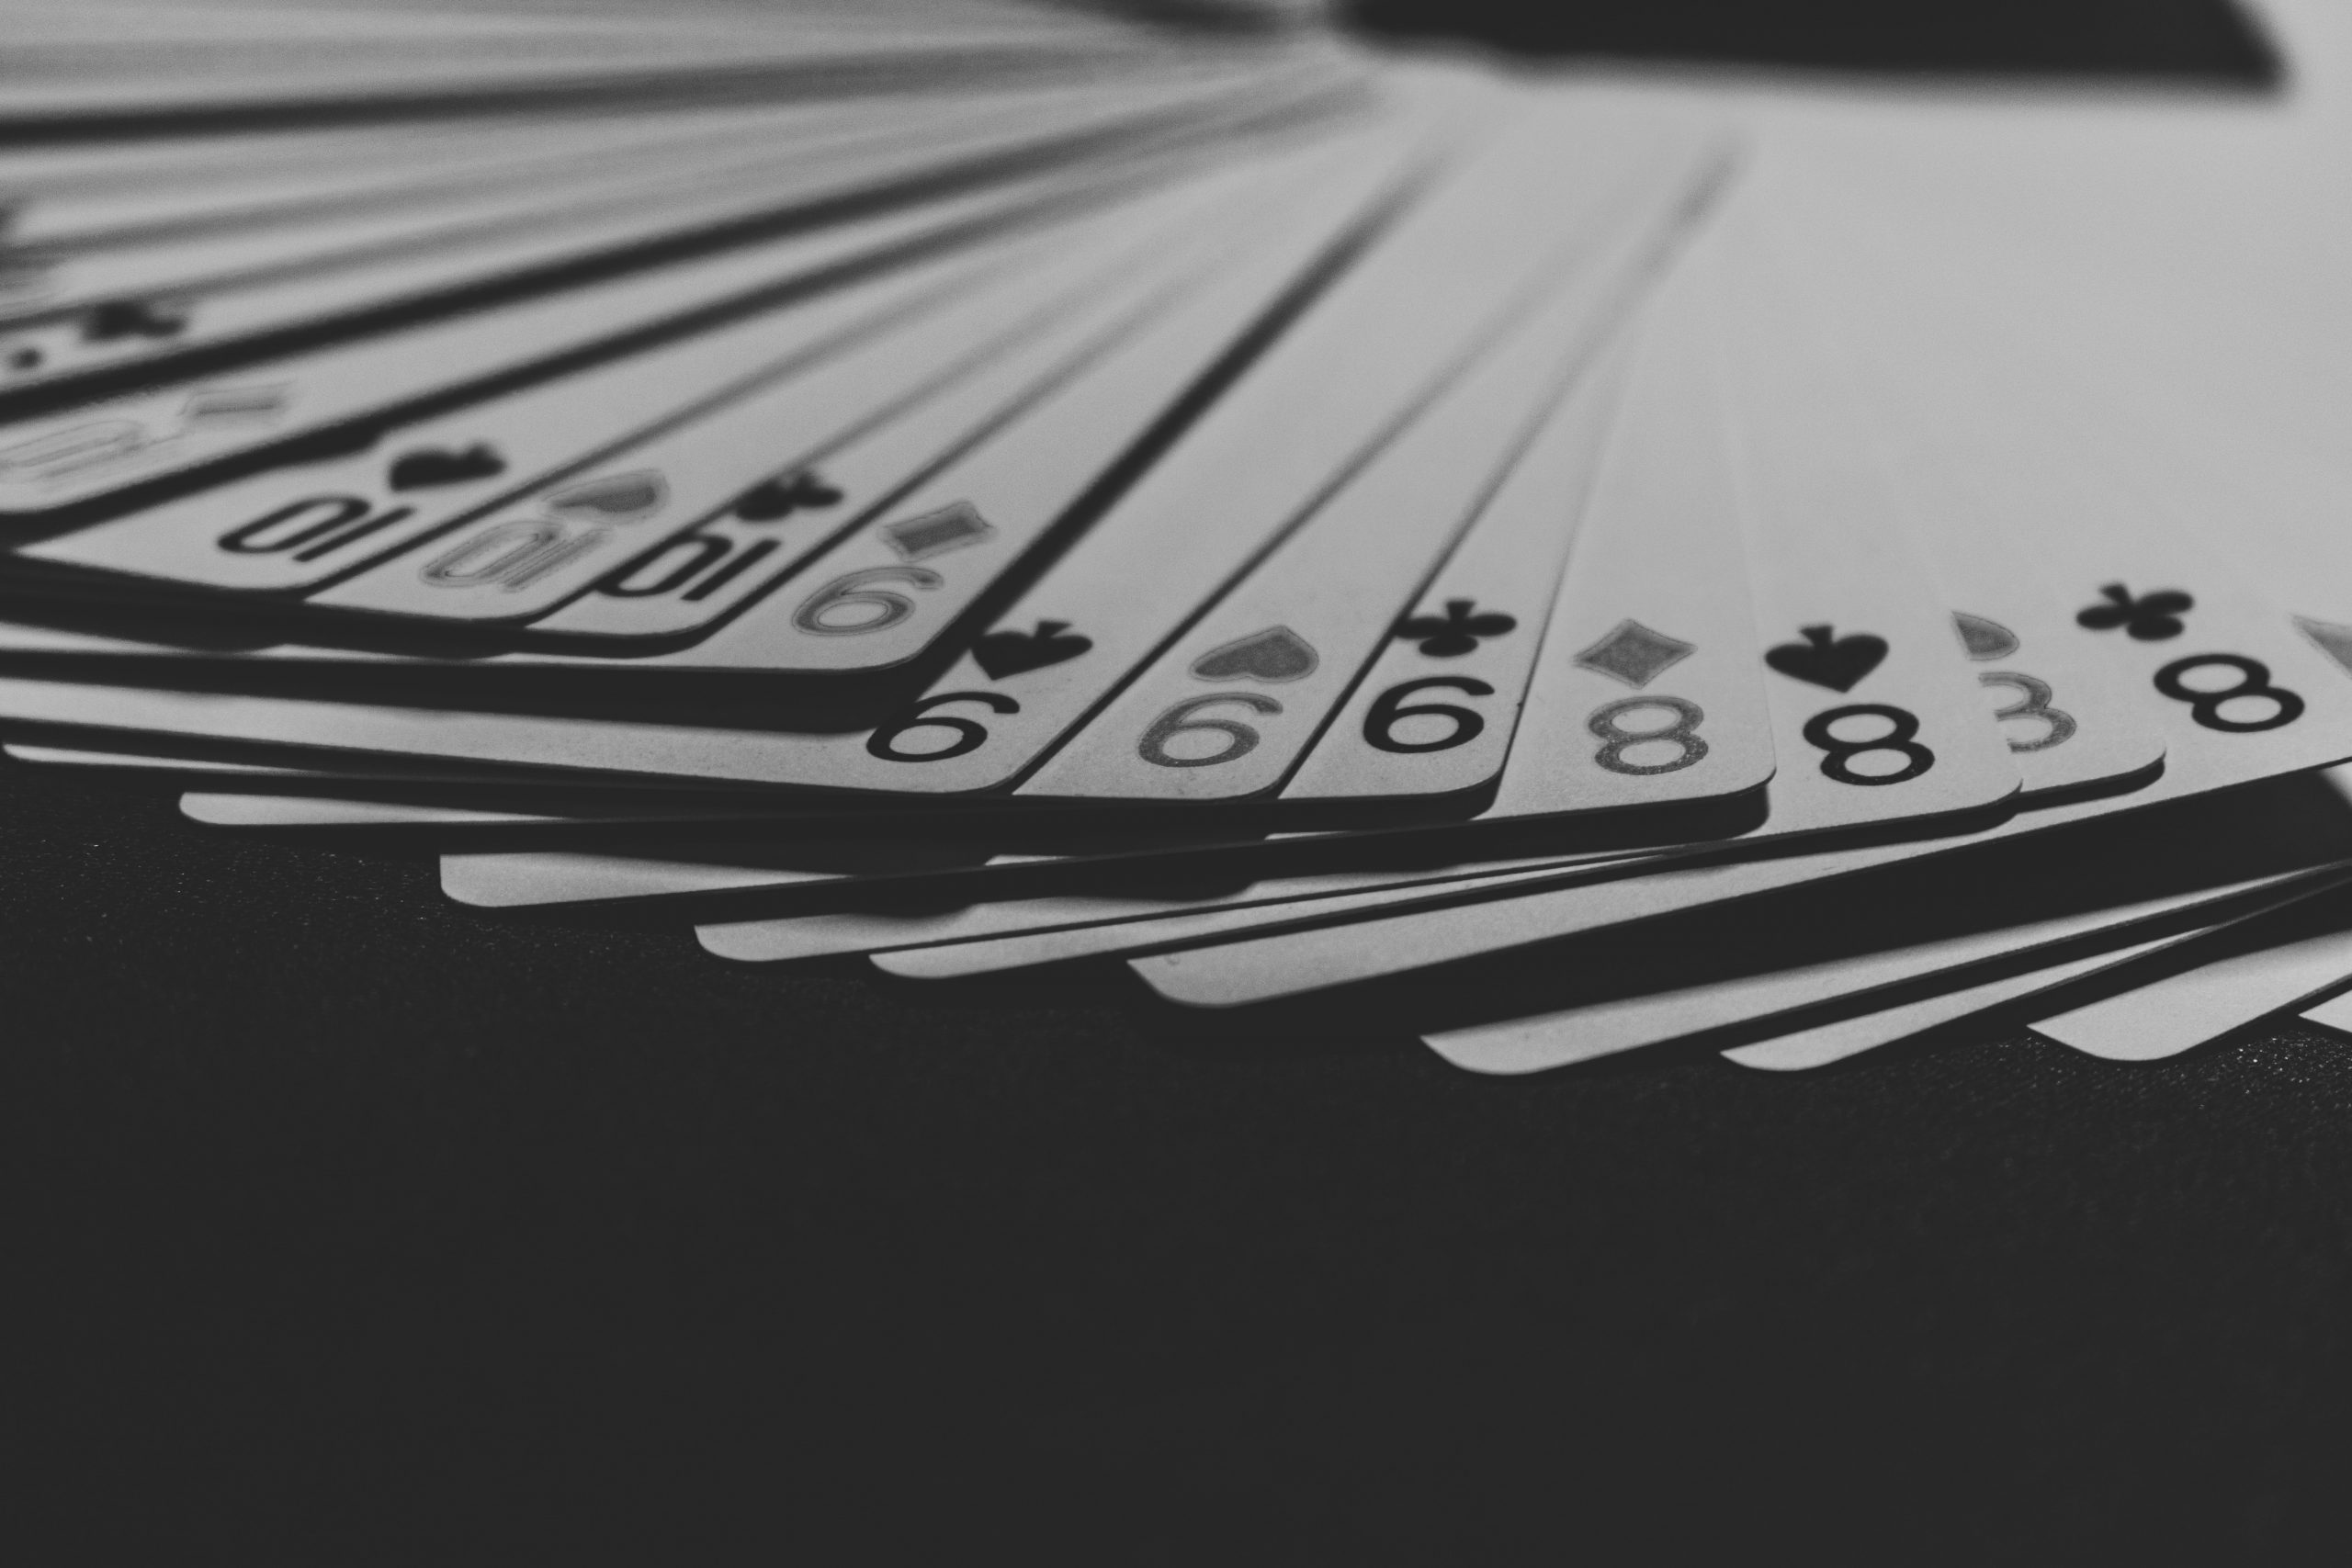 grayscale photo of a fanned playing card